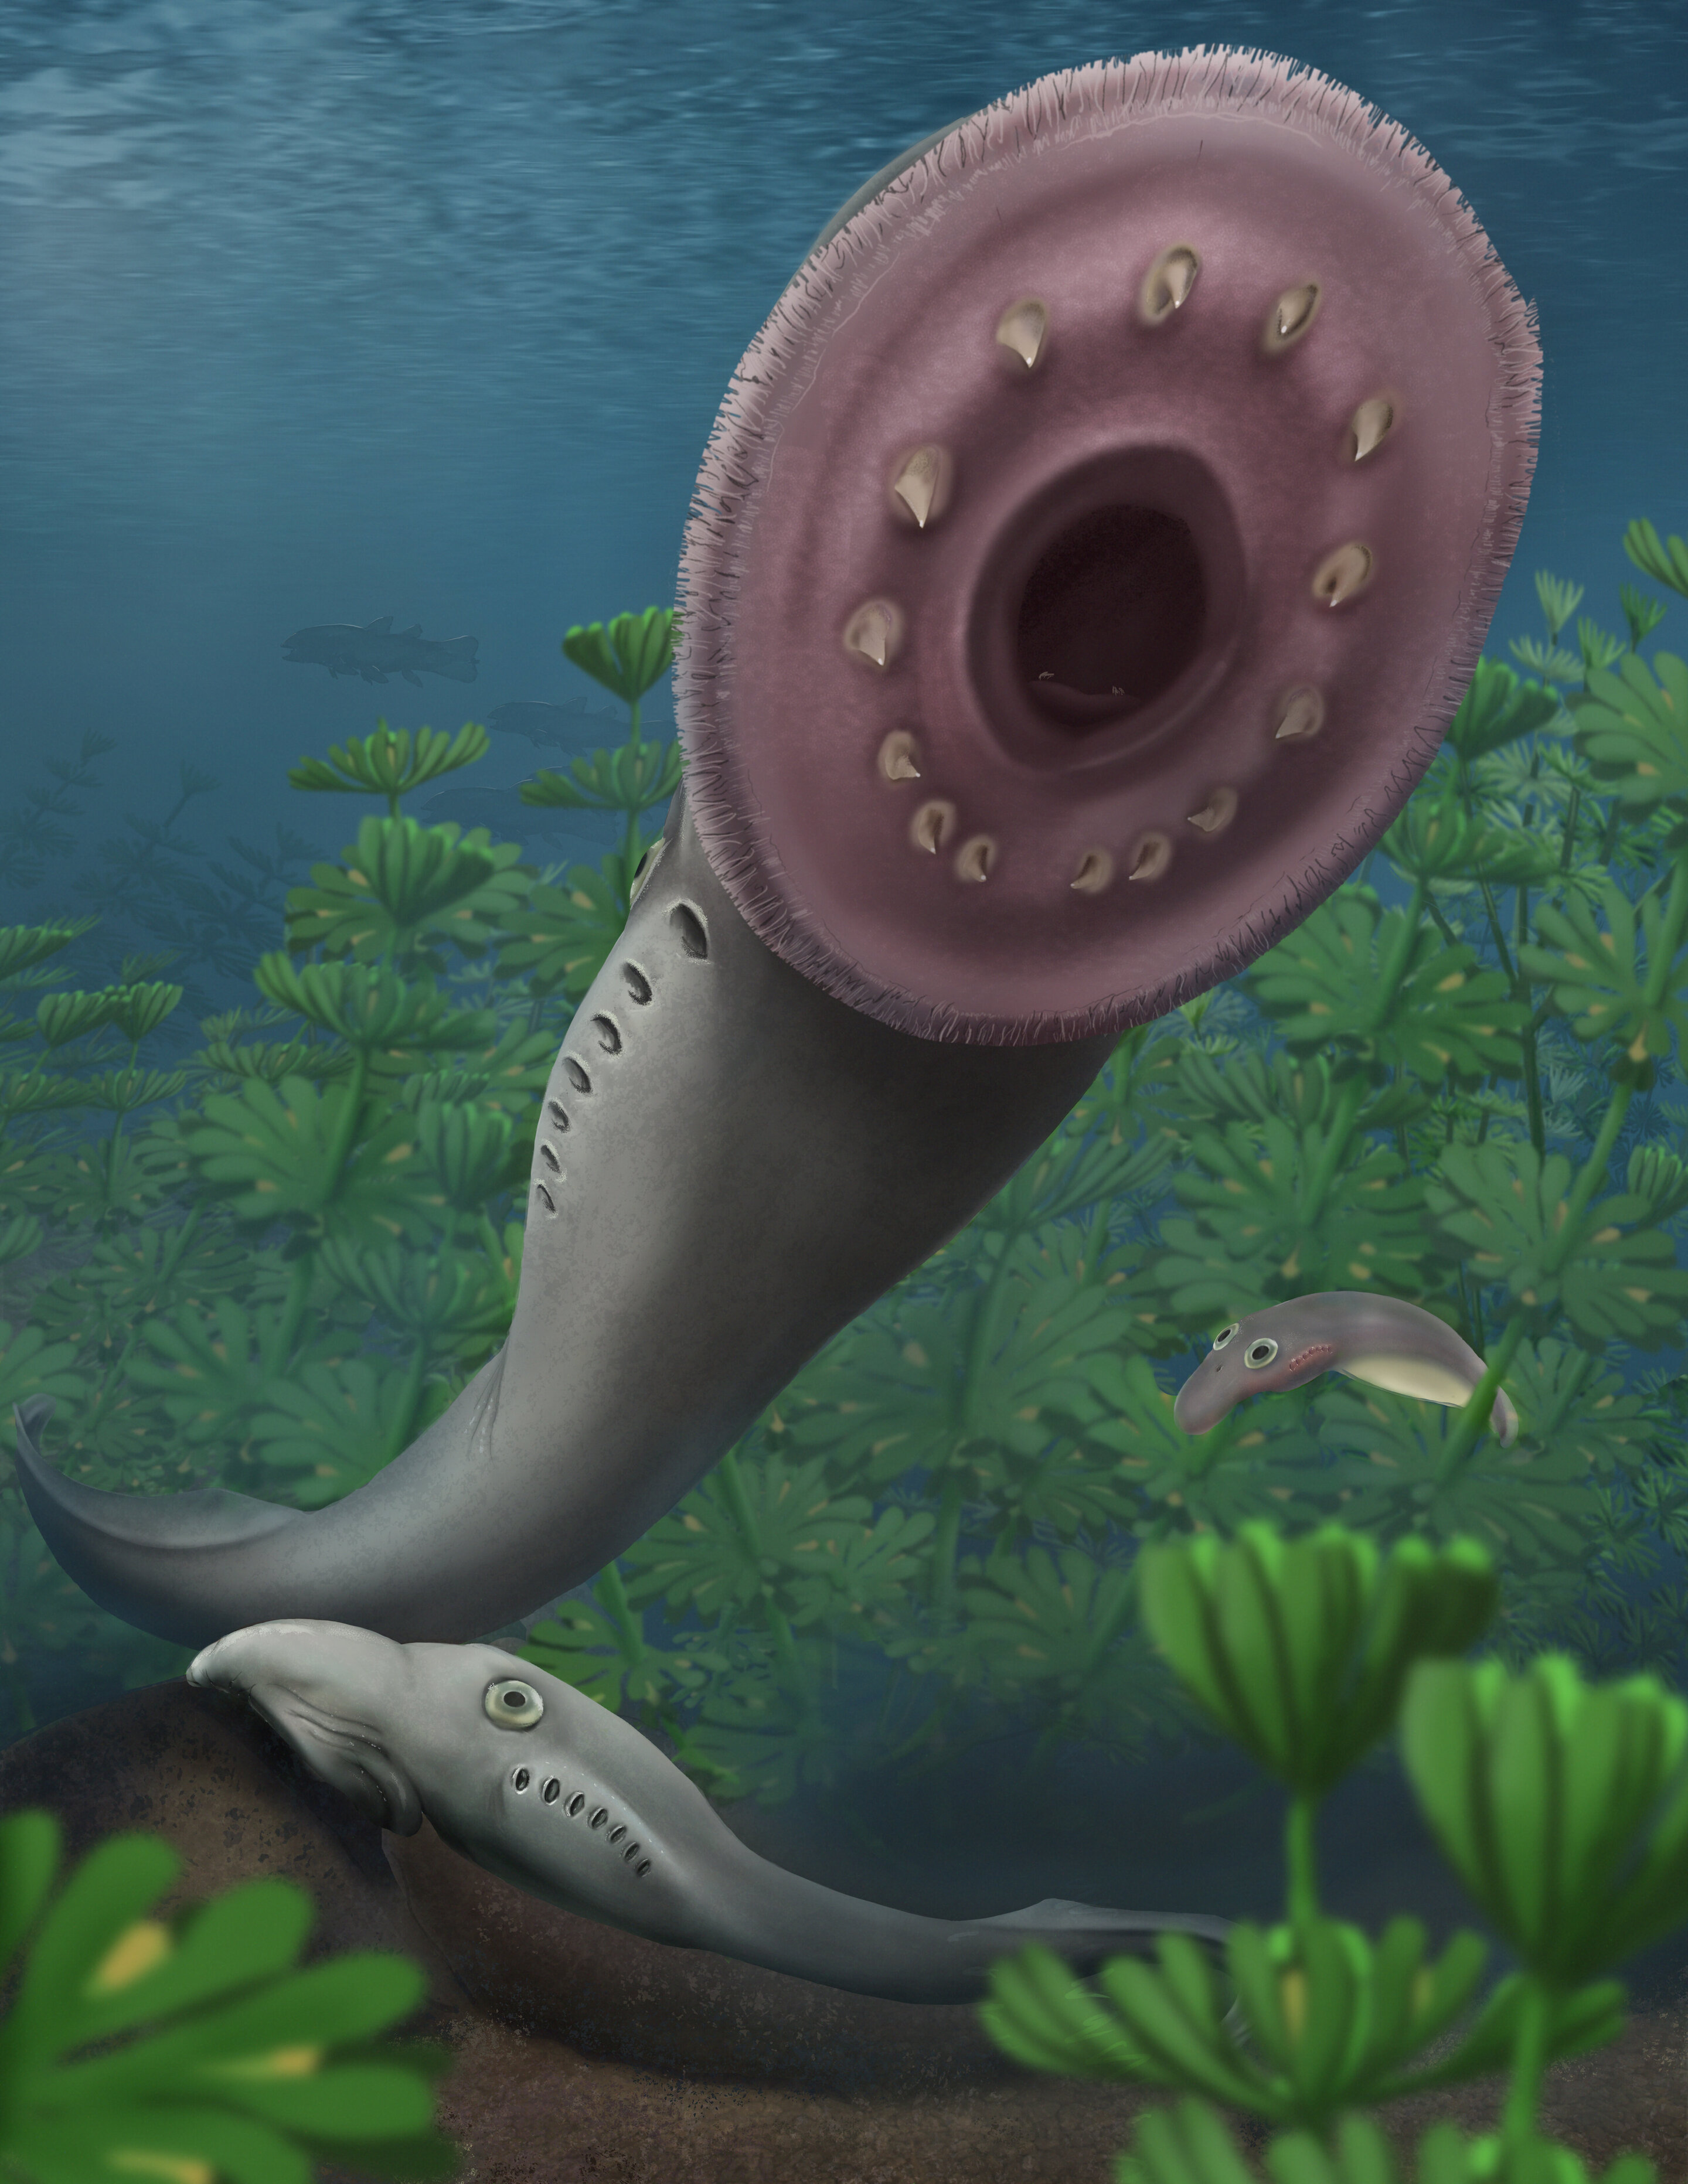 Long accepted theory of the origin of vertebrates overturned by fossilized fish larvae